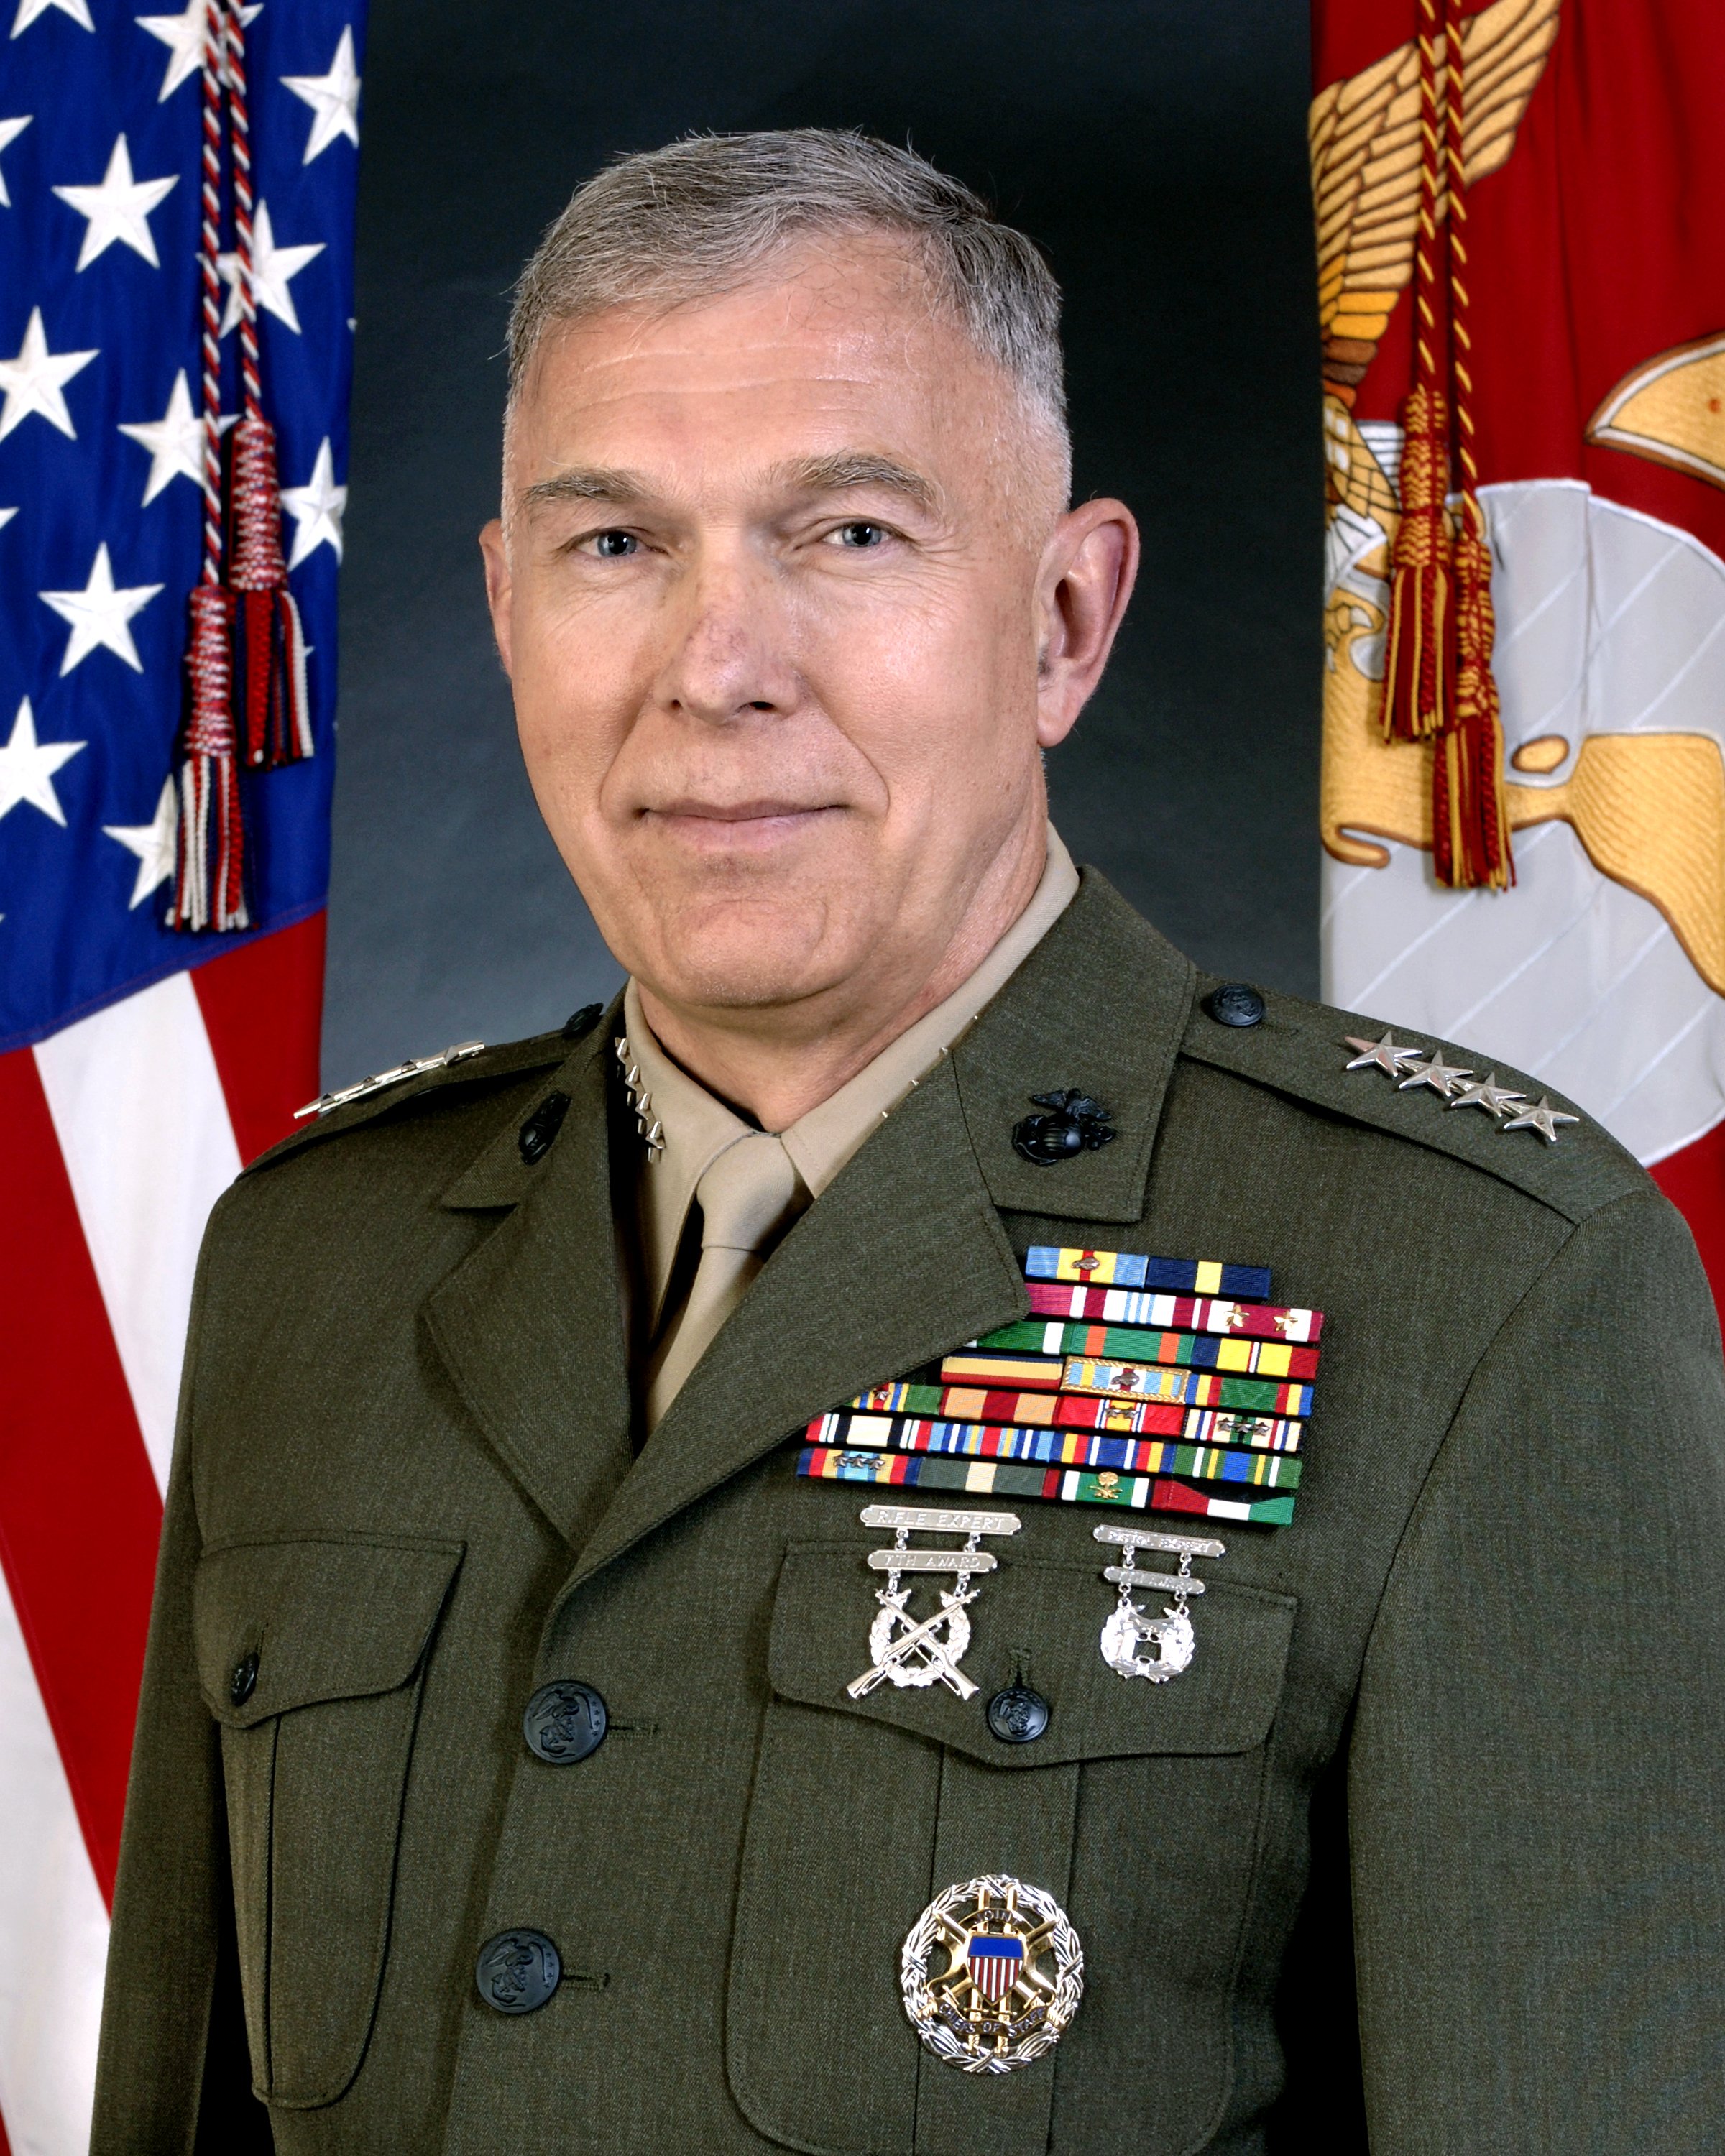 file-james-t-conway-official-military-photo-portrait-2006-jpg-wikimedia-commons